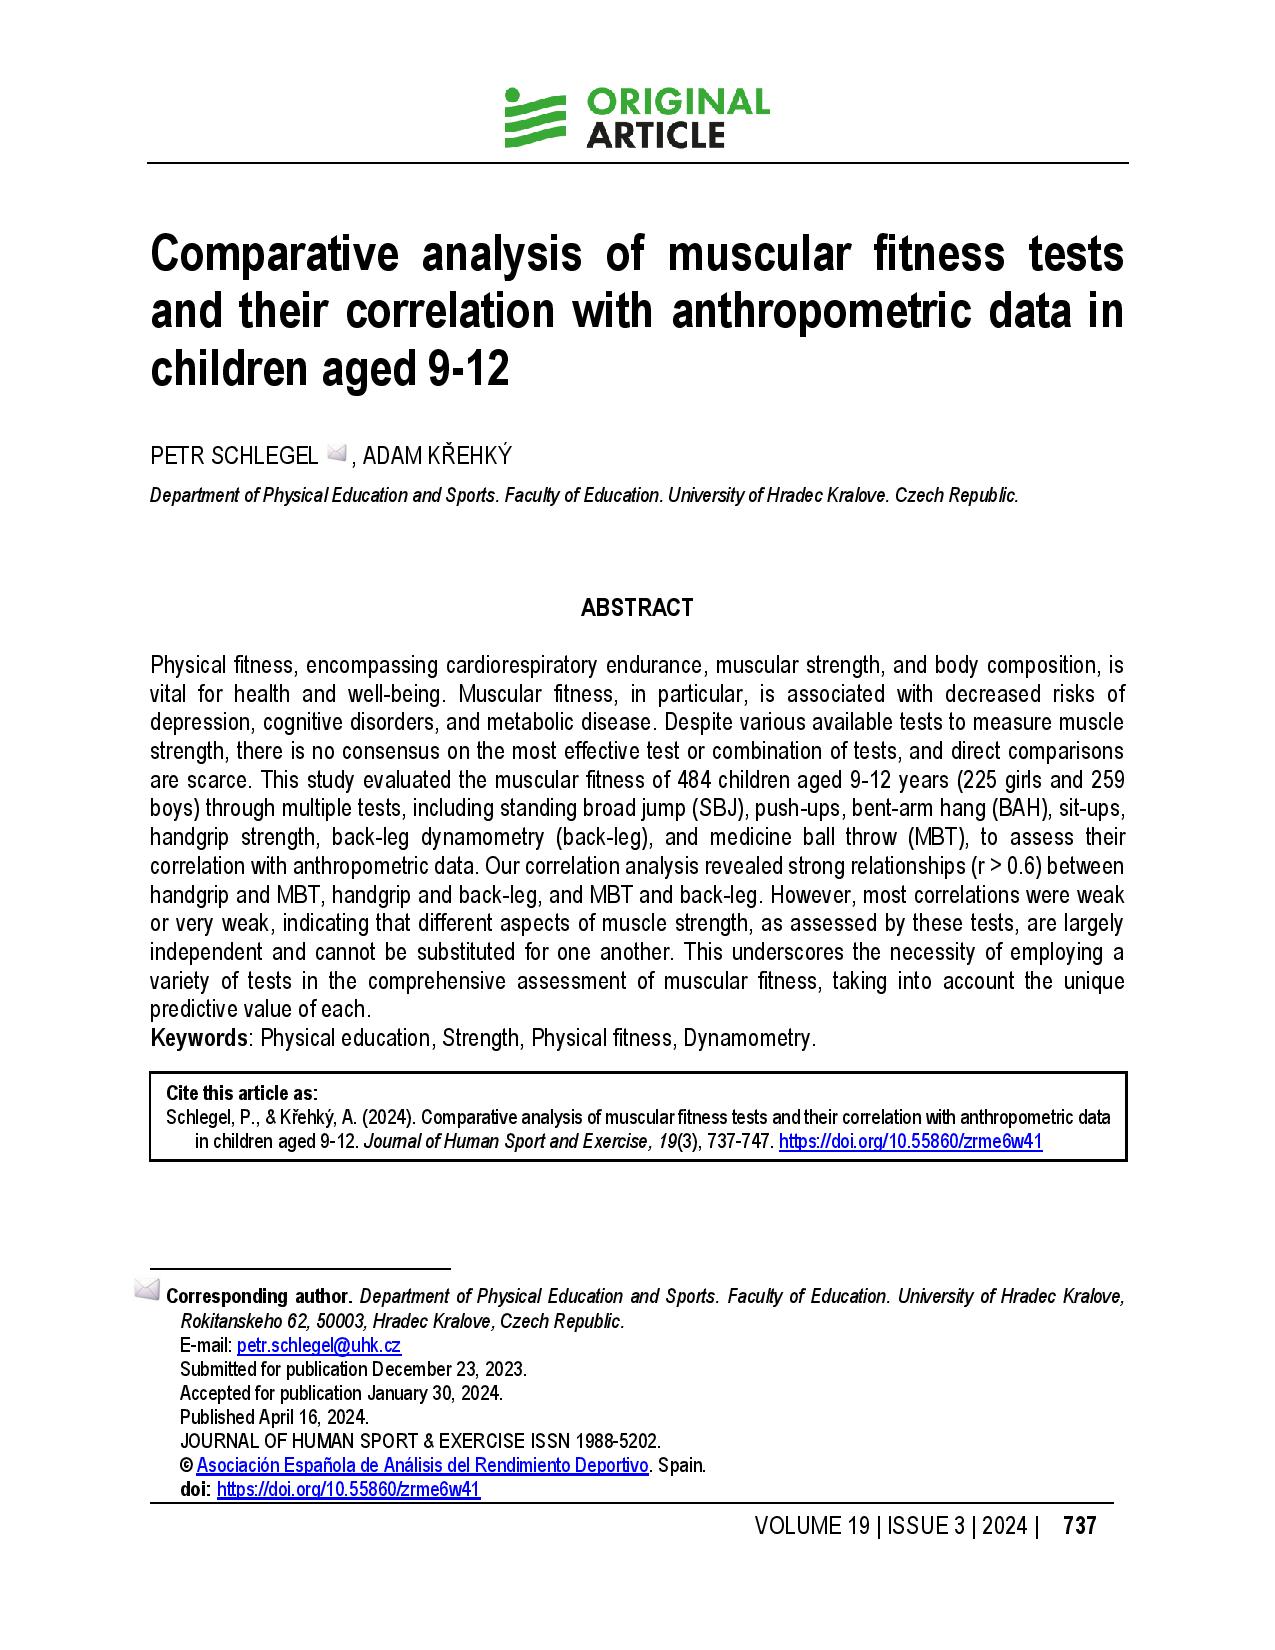 Comparative analysis of muscular fitness tests and their correlation with anthropometric data in children